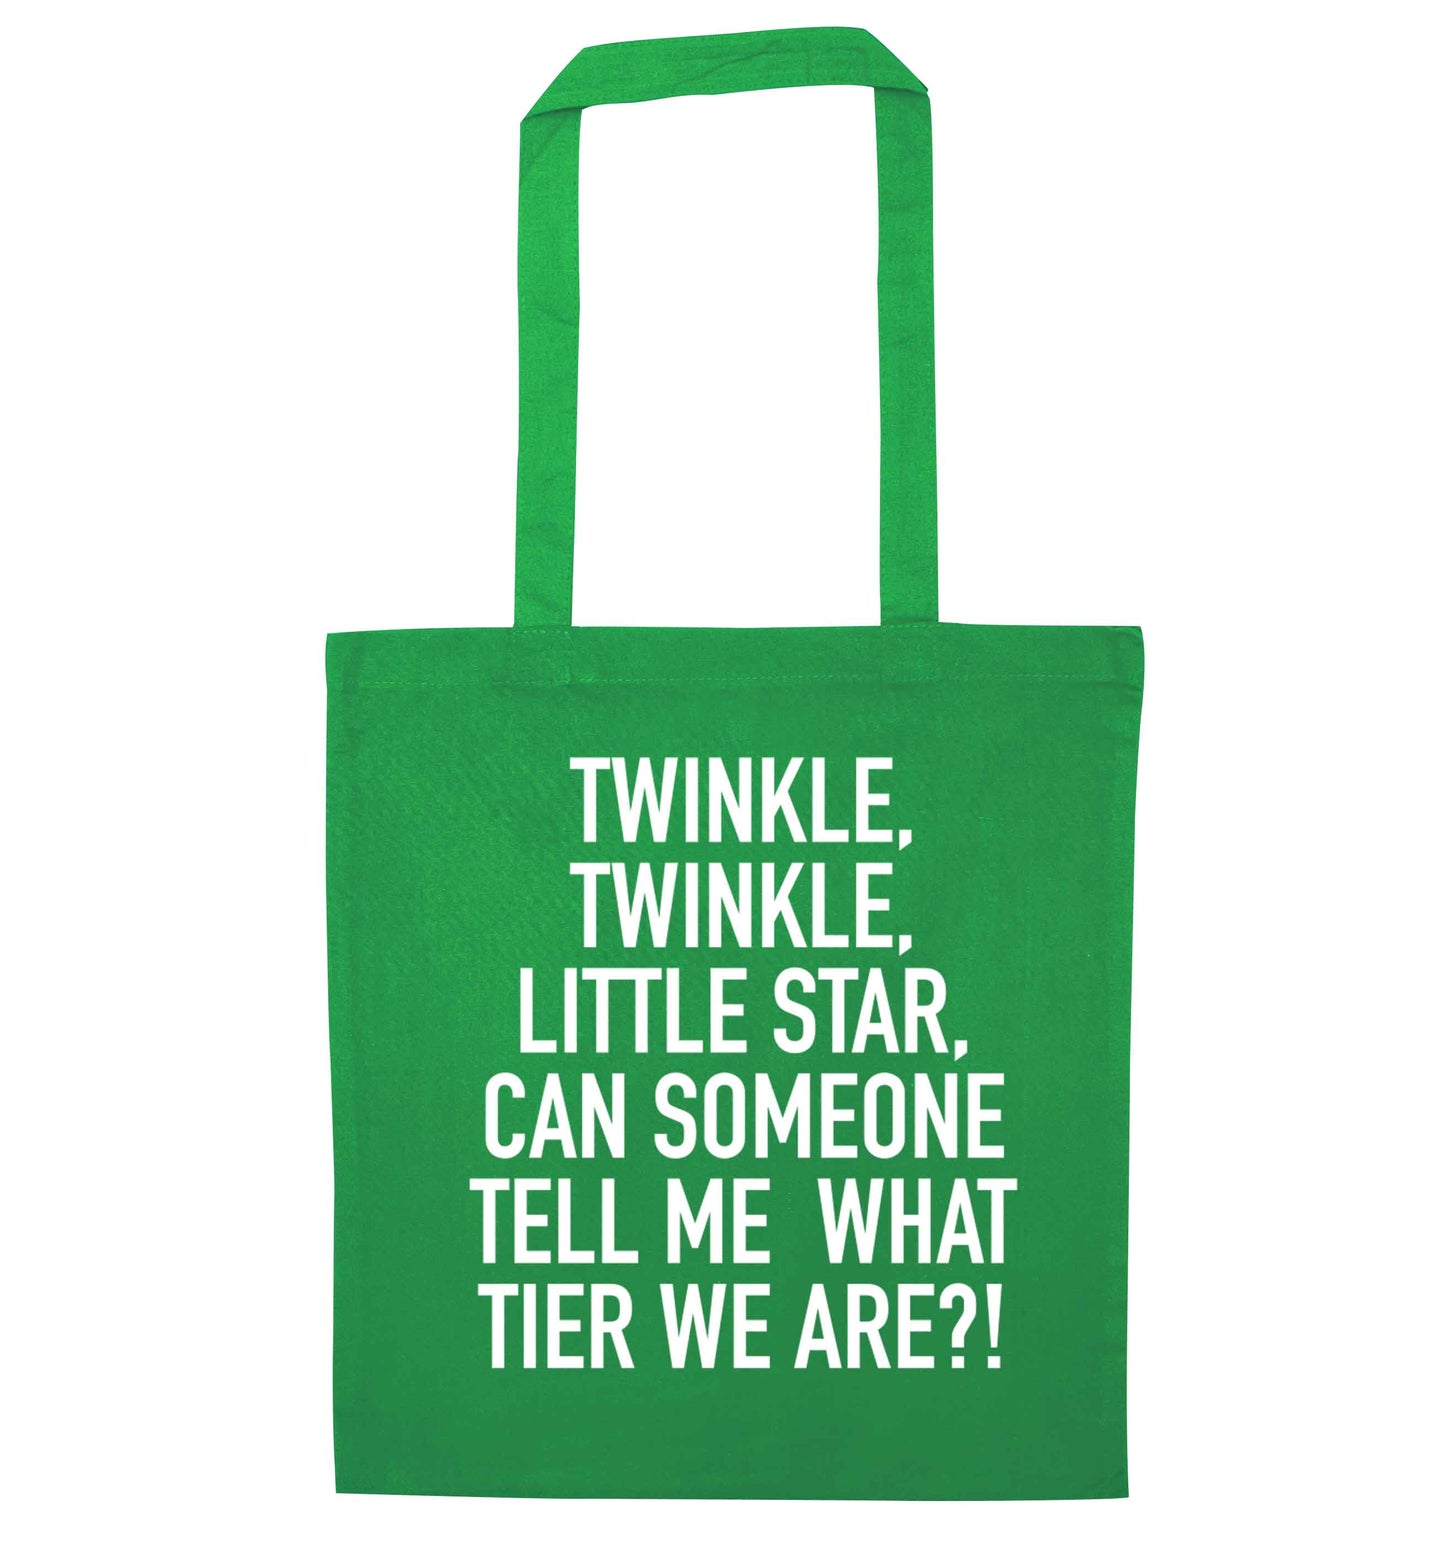 Twinkle twinkle, little star does anyone know what tier we are? green tote bag